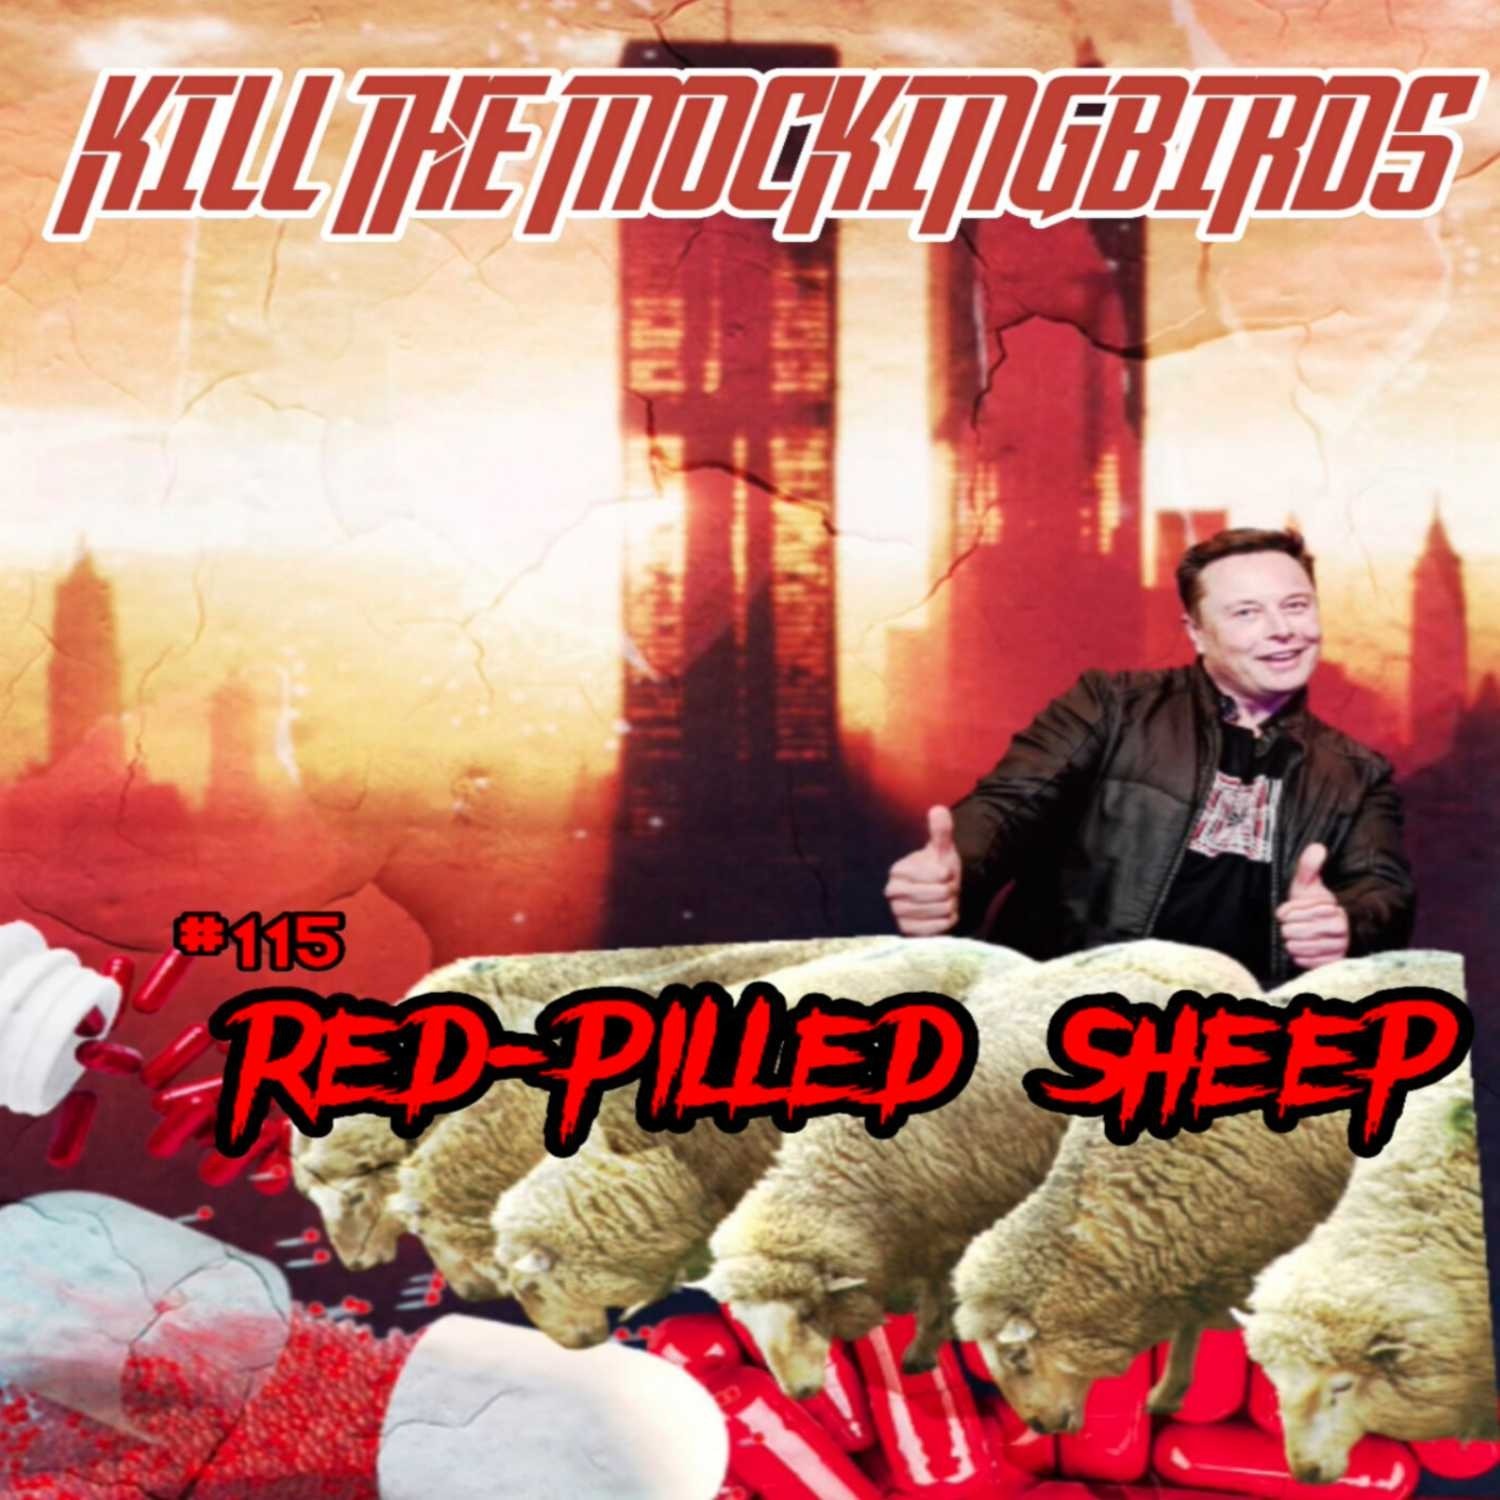 #115 “RED-PILLED SHEEP”